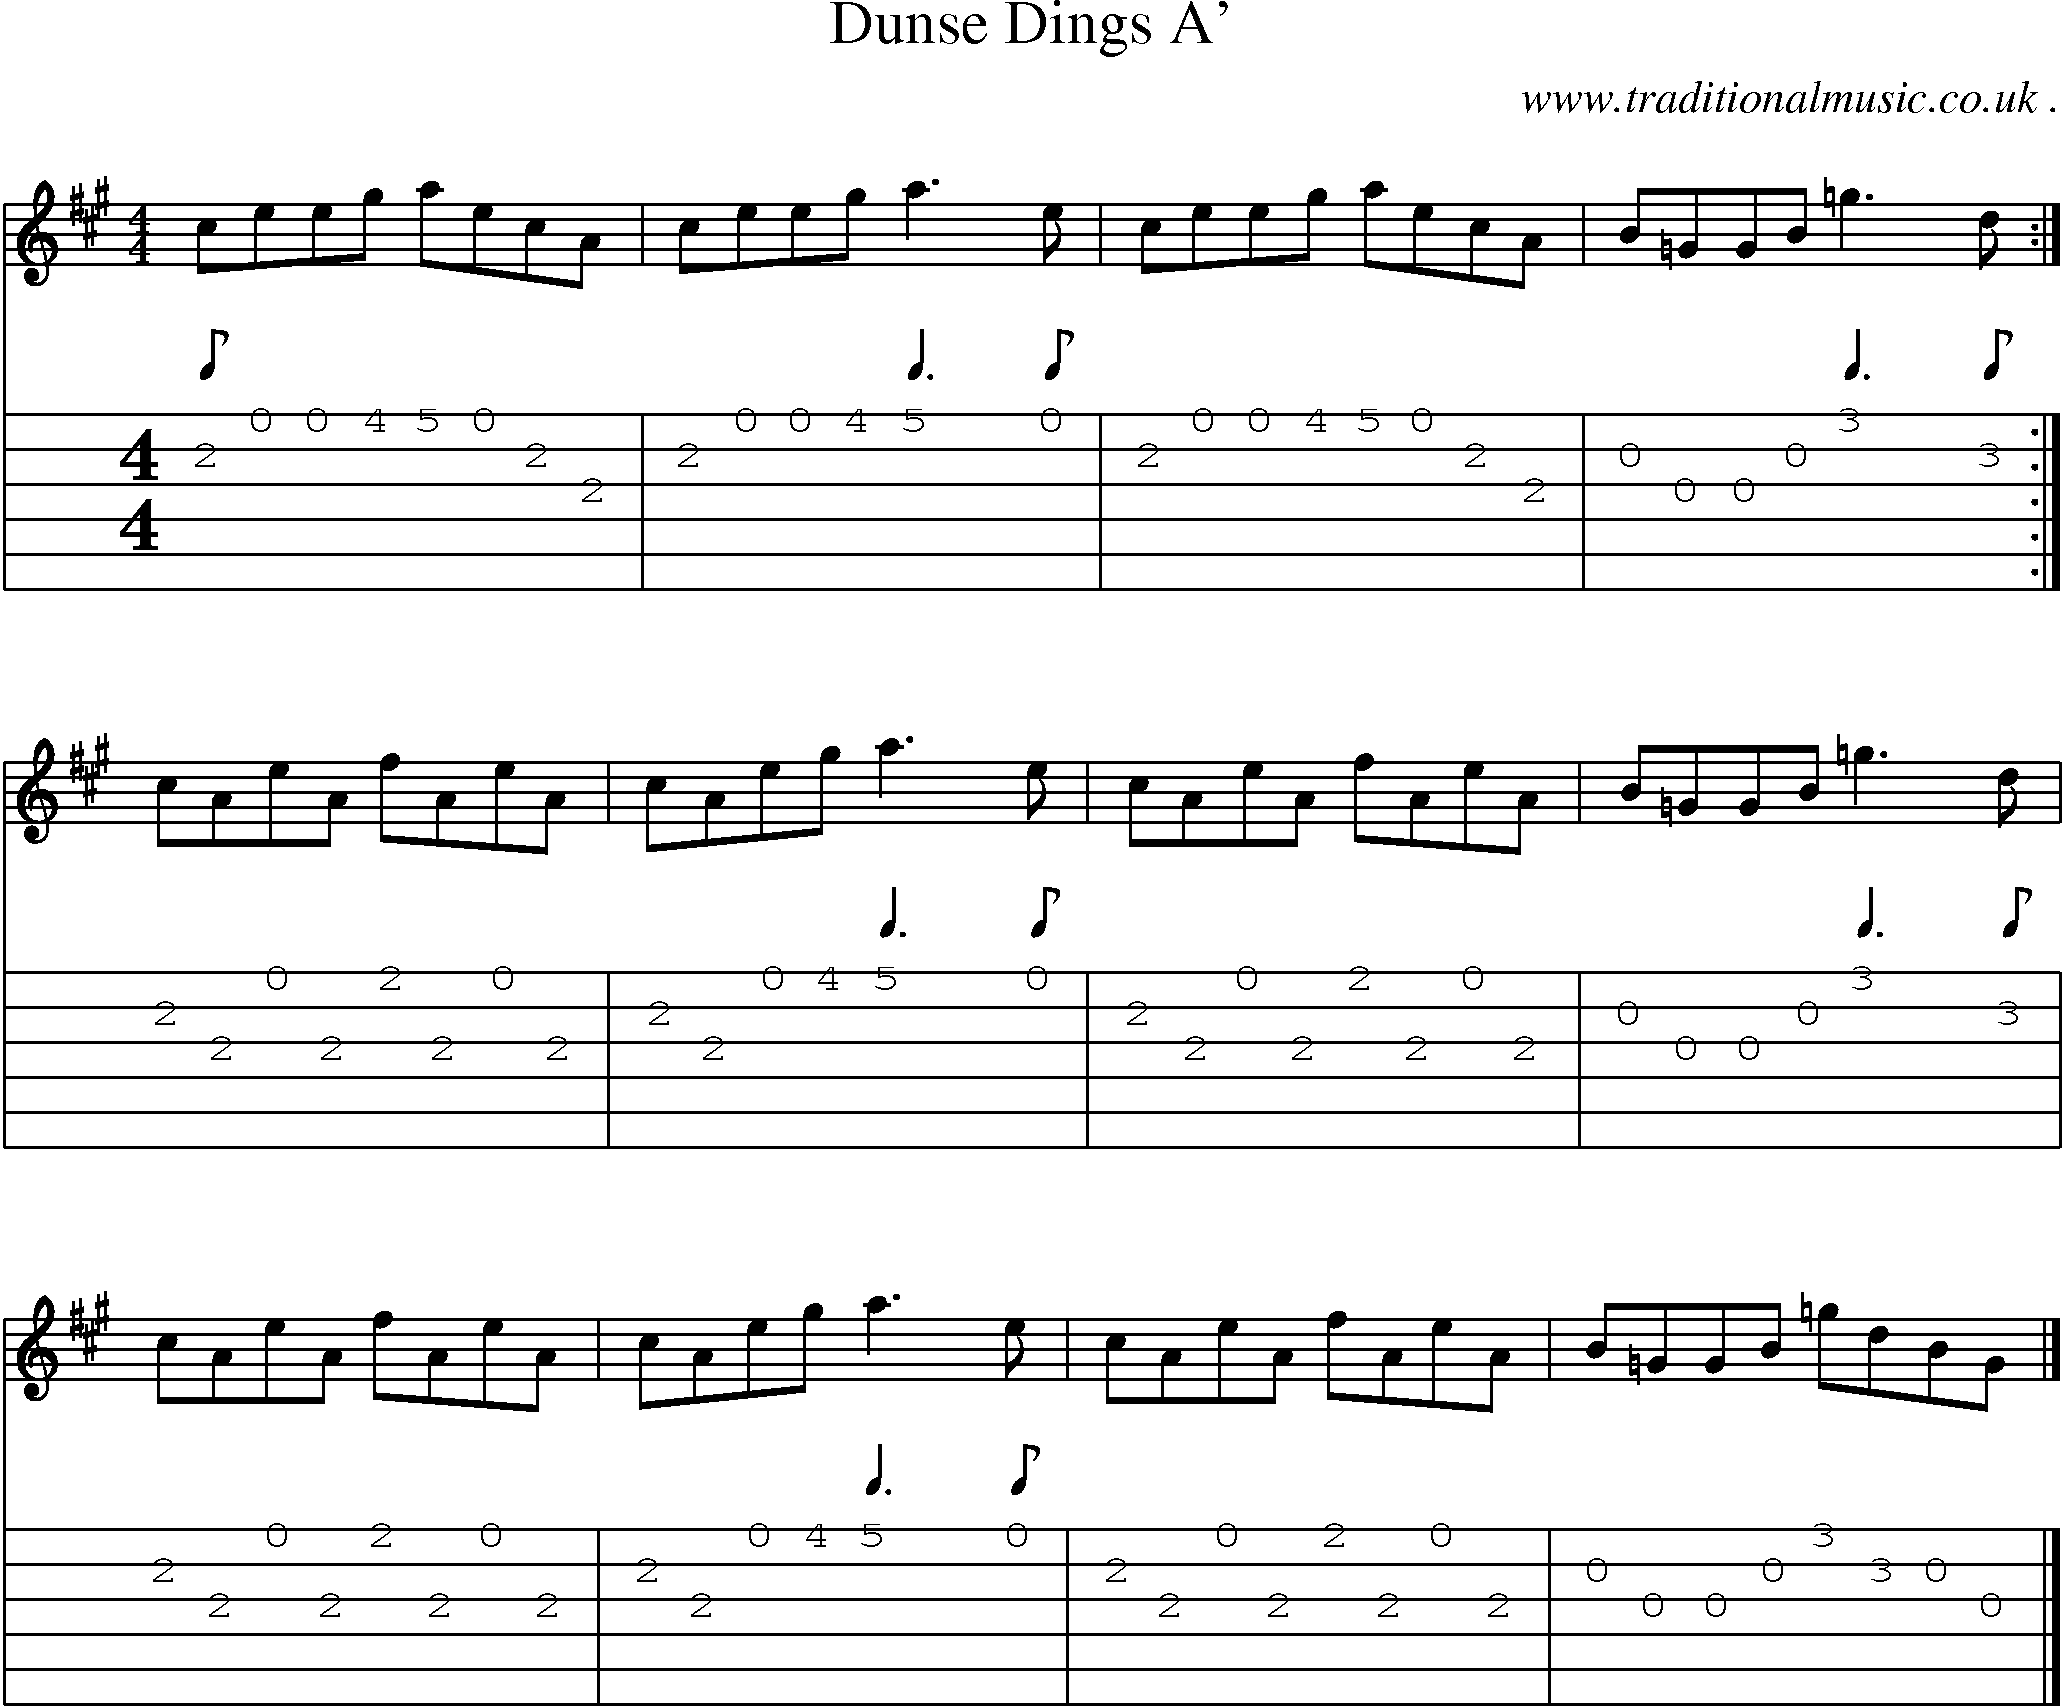 Sheet-music  score, Chords and Guitar Tabs for Dunse Dings A